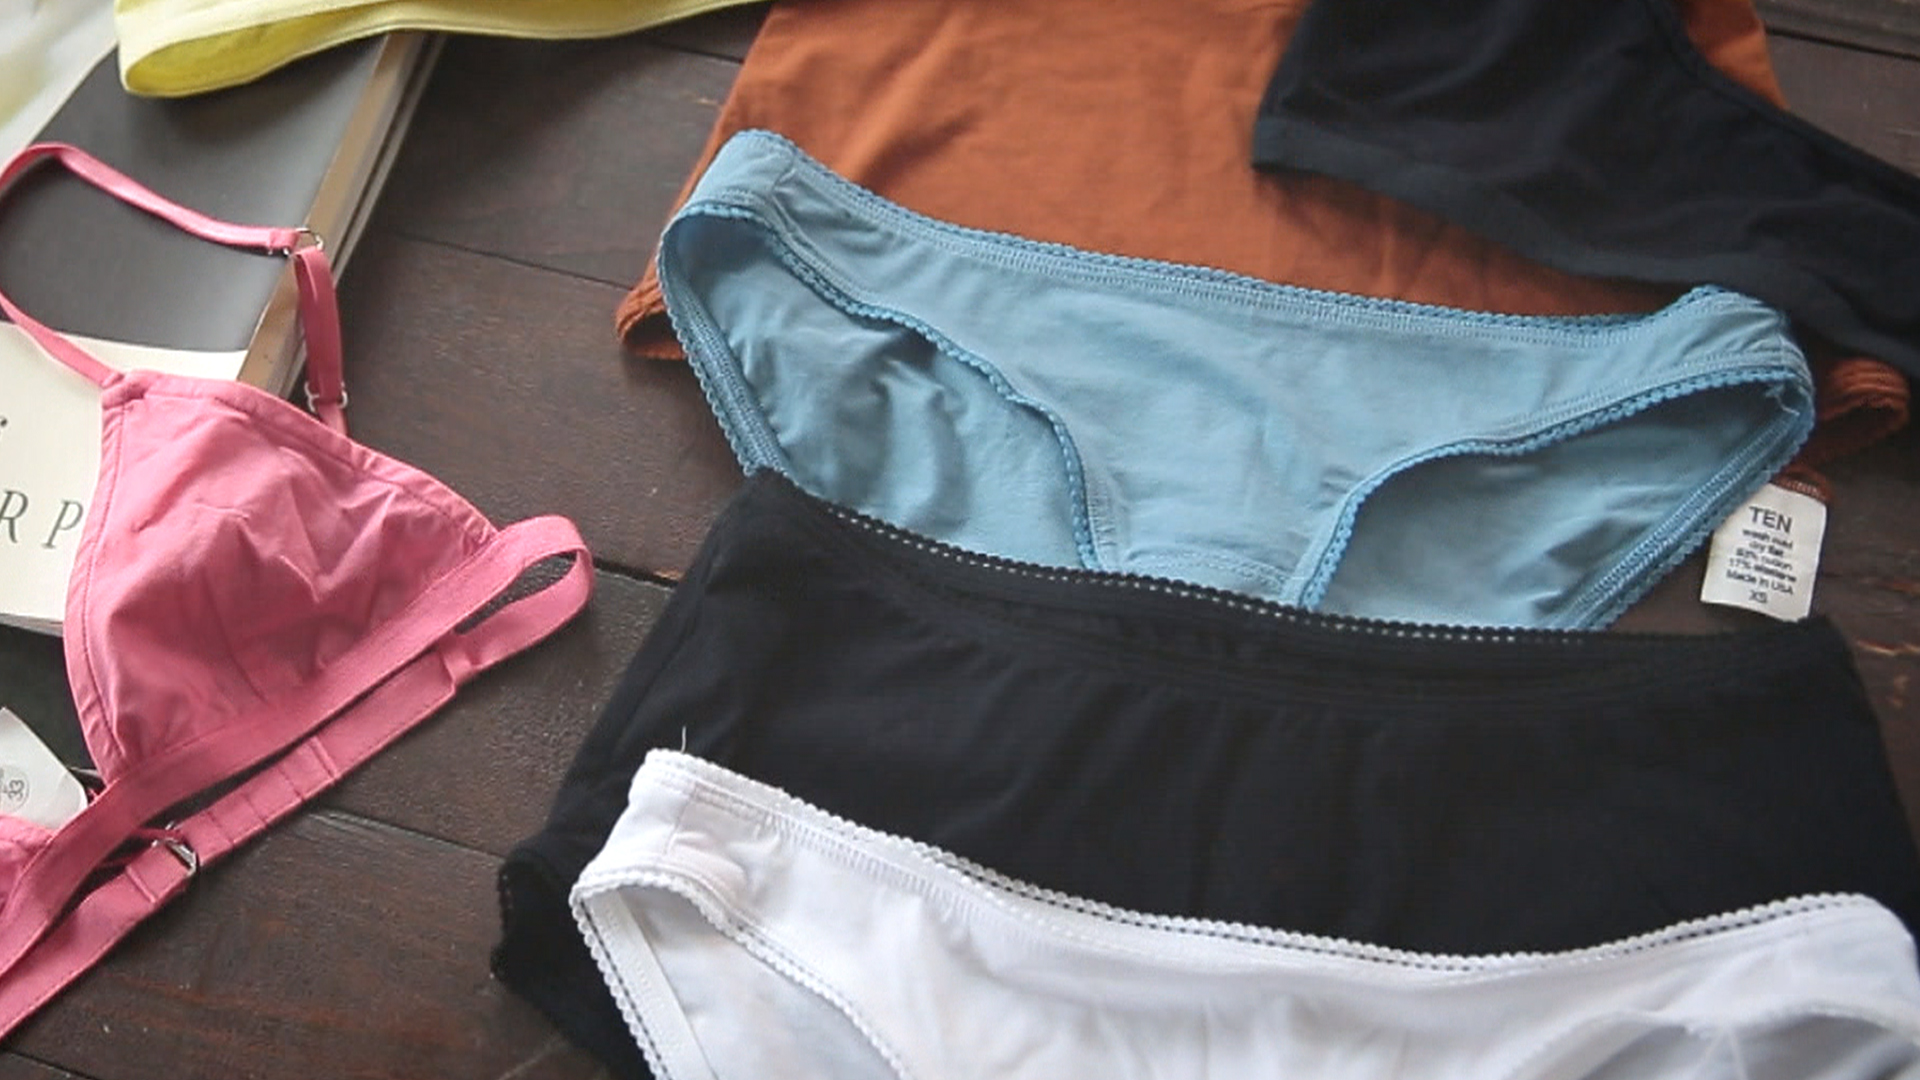 Boxers, granny panties, tighty whities what can stay and what